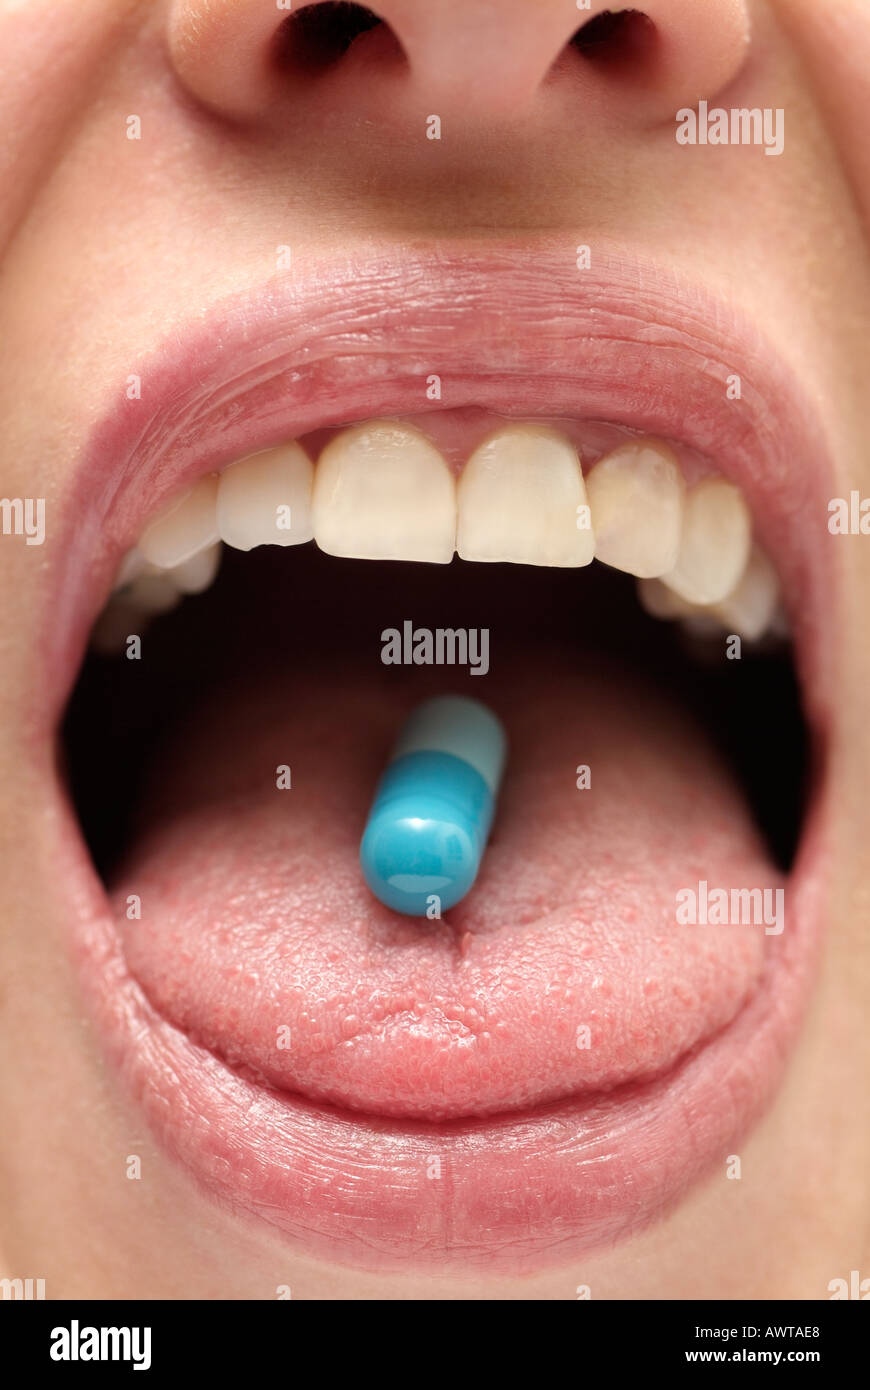 Females Mouth with a Capsule on the Tongue, Close Up. Stock Photo